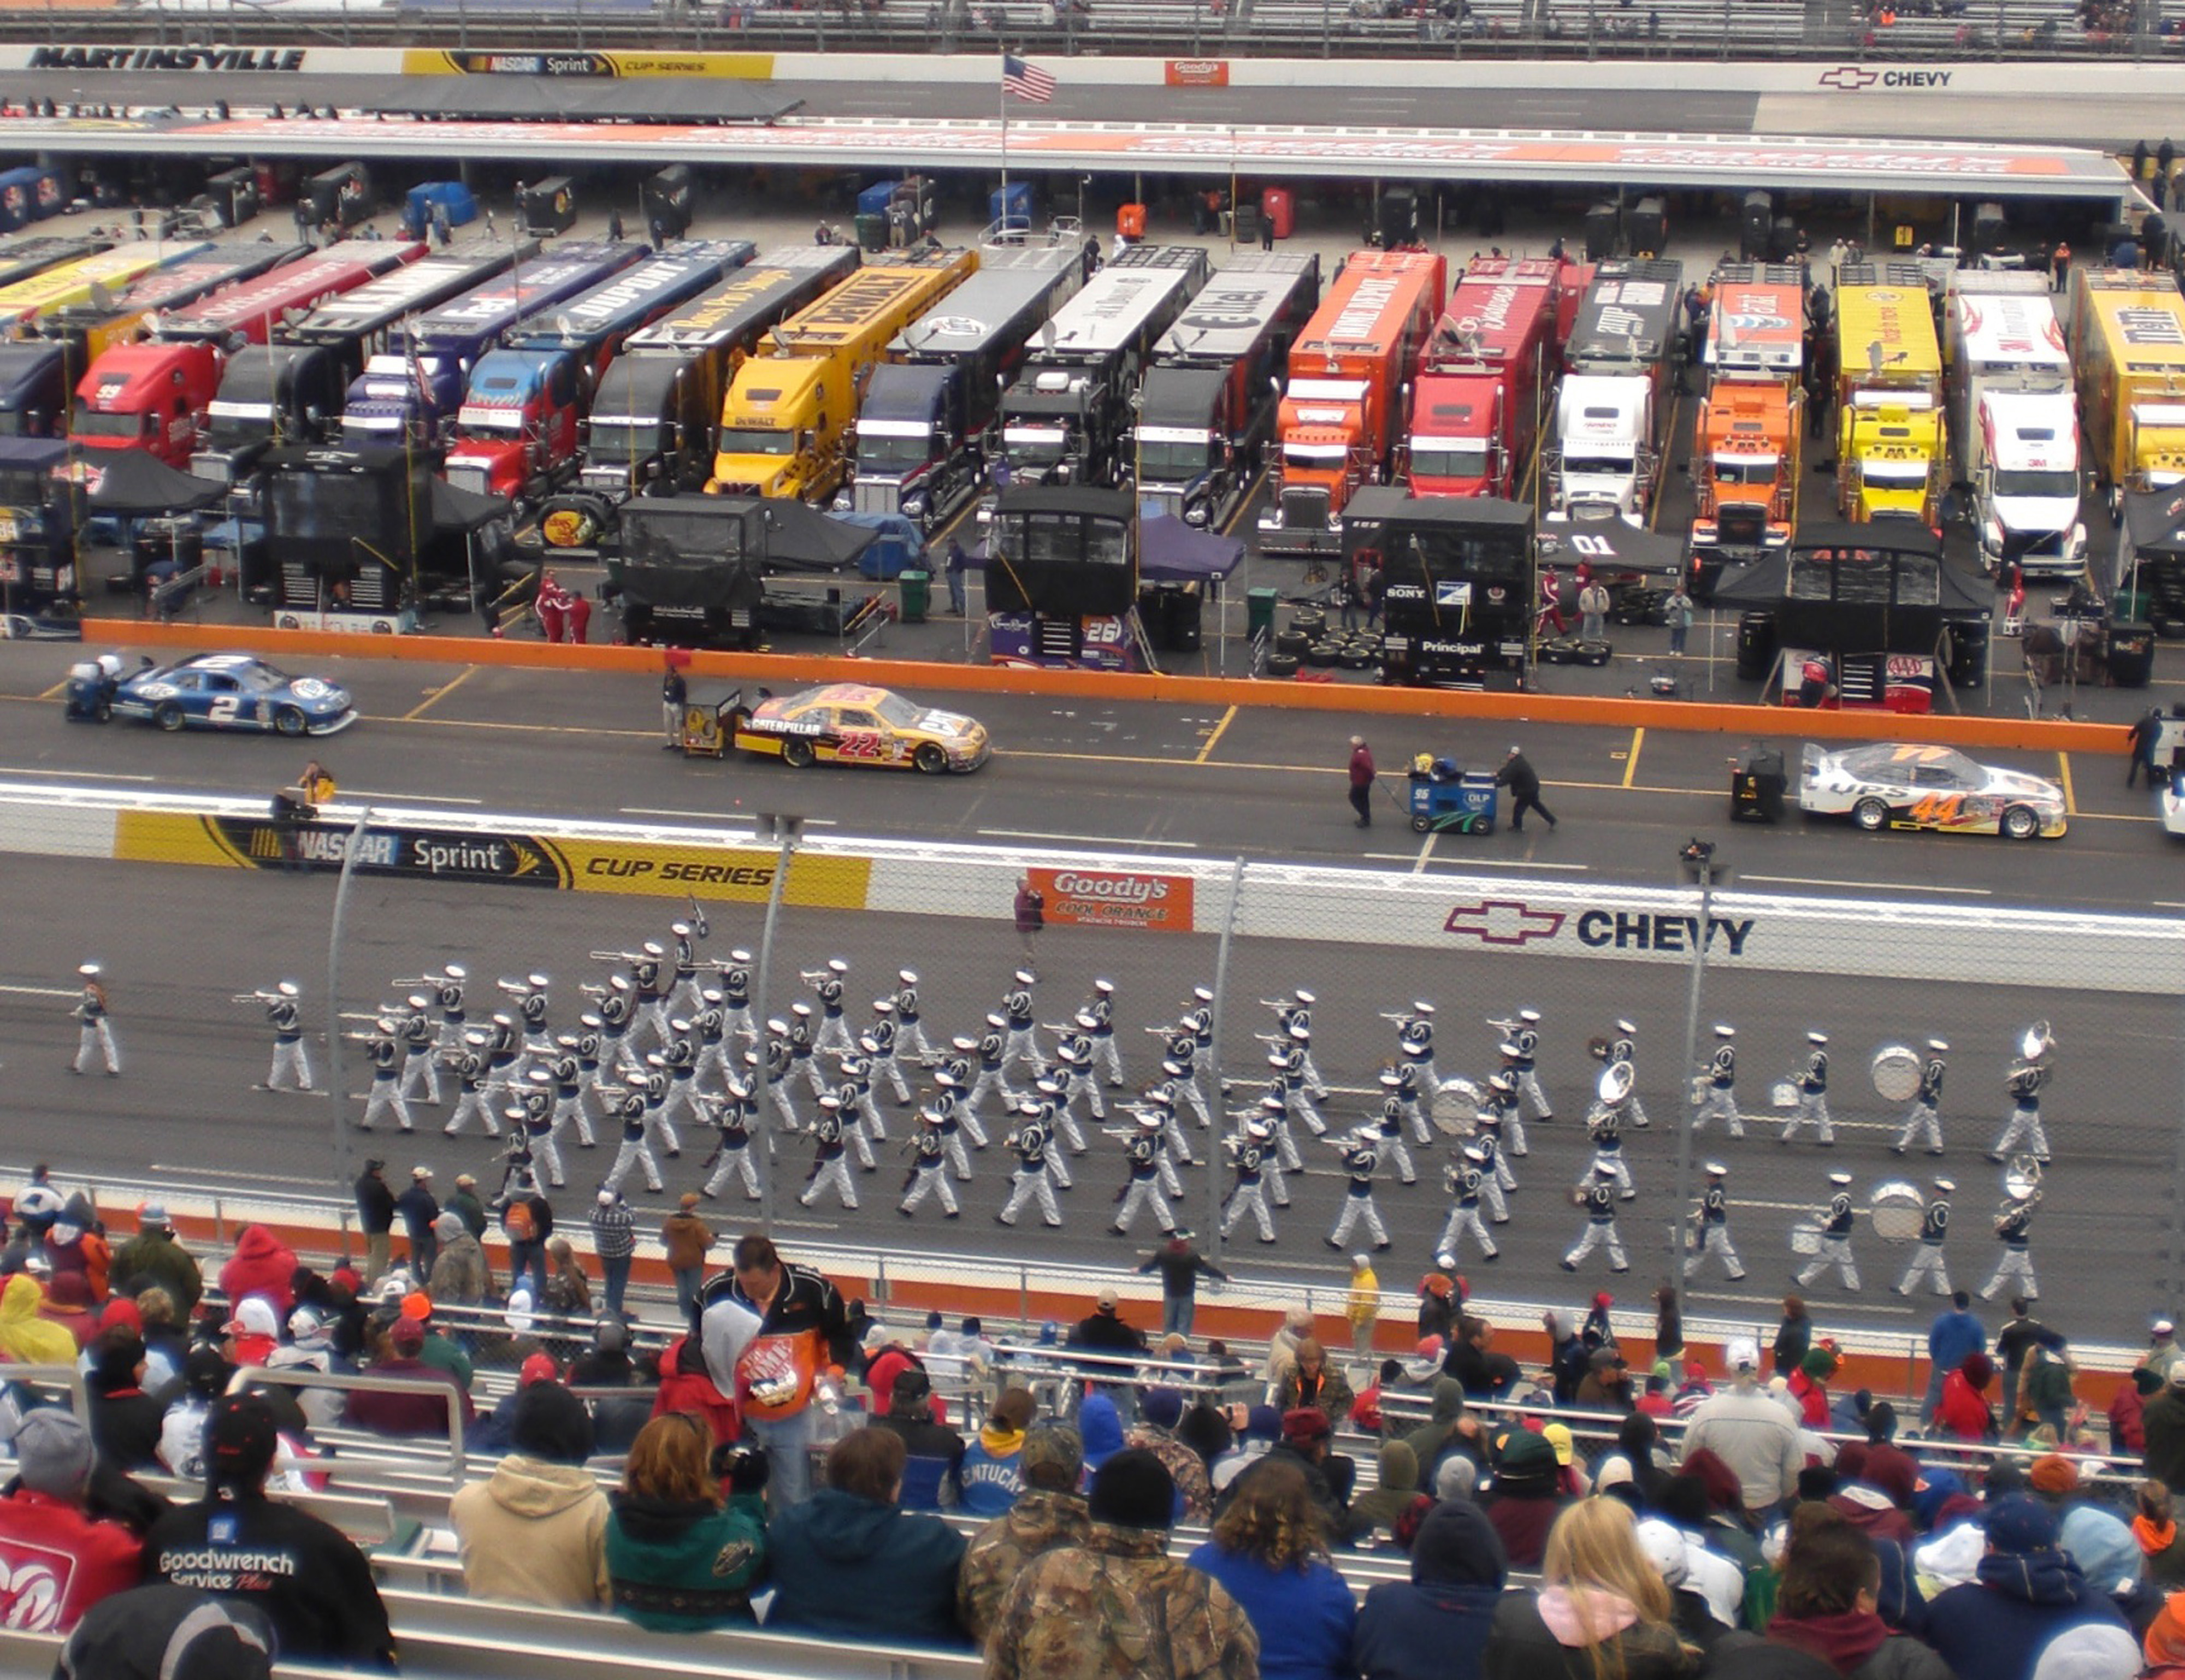 The Virginia Tech Corps of Cadets Regimental Band, the Highty-Tighties, is seen performing at Martinsville Speedway